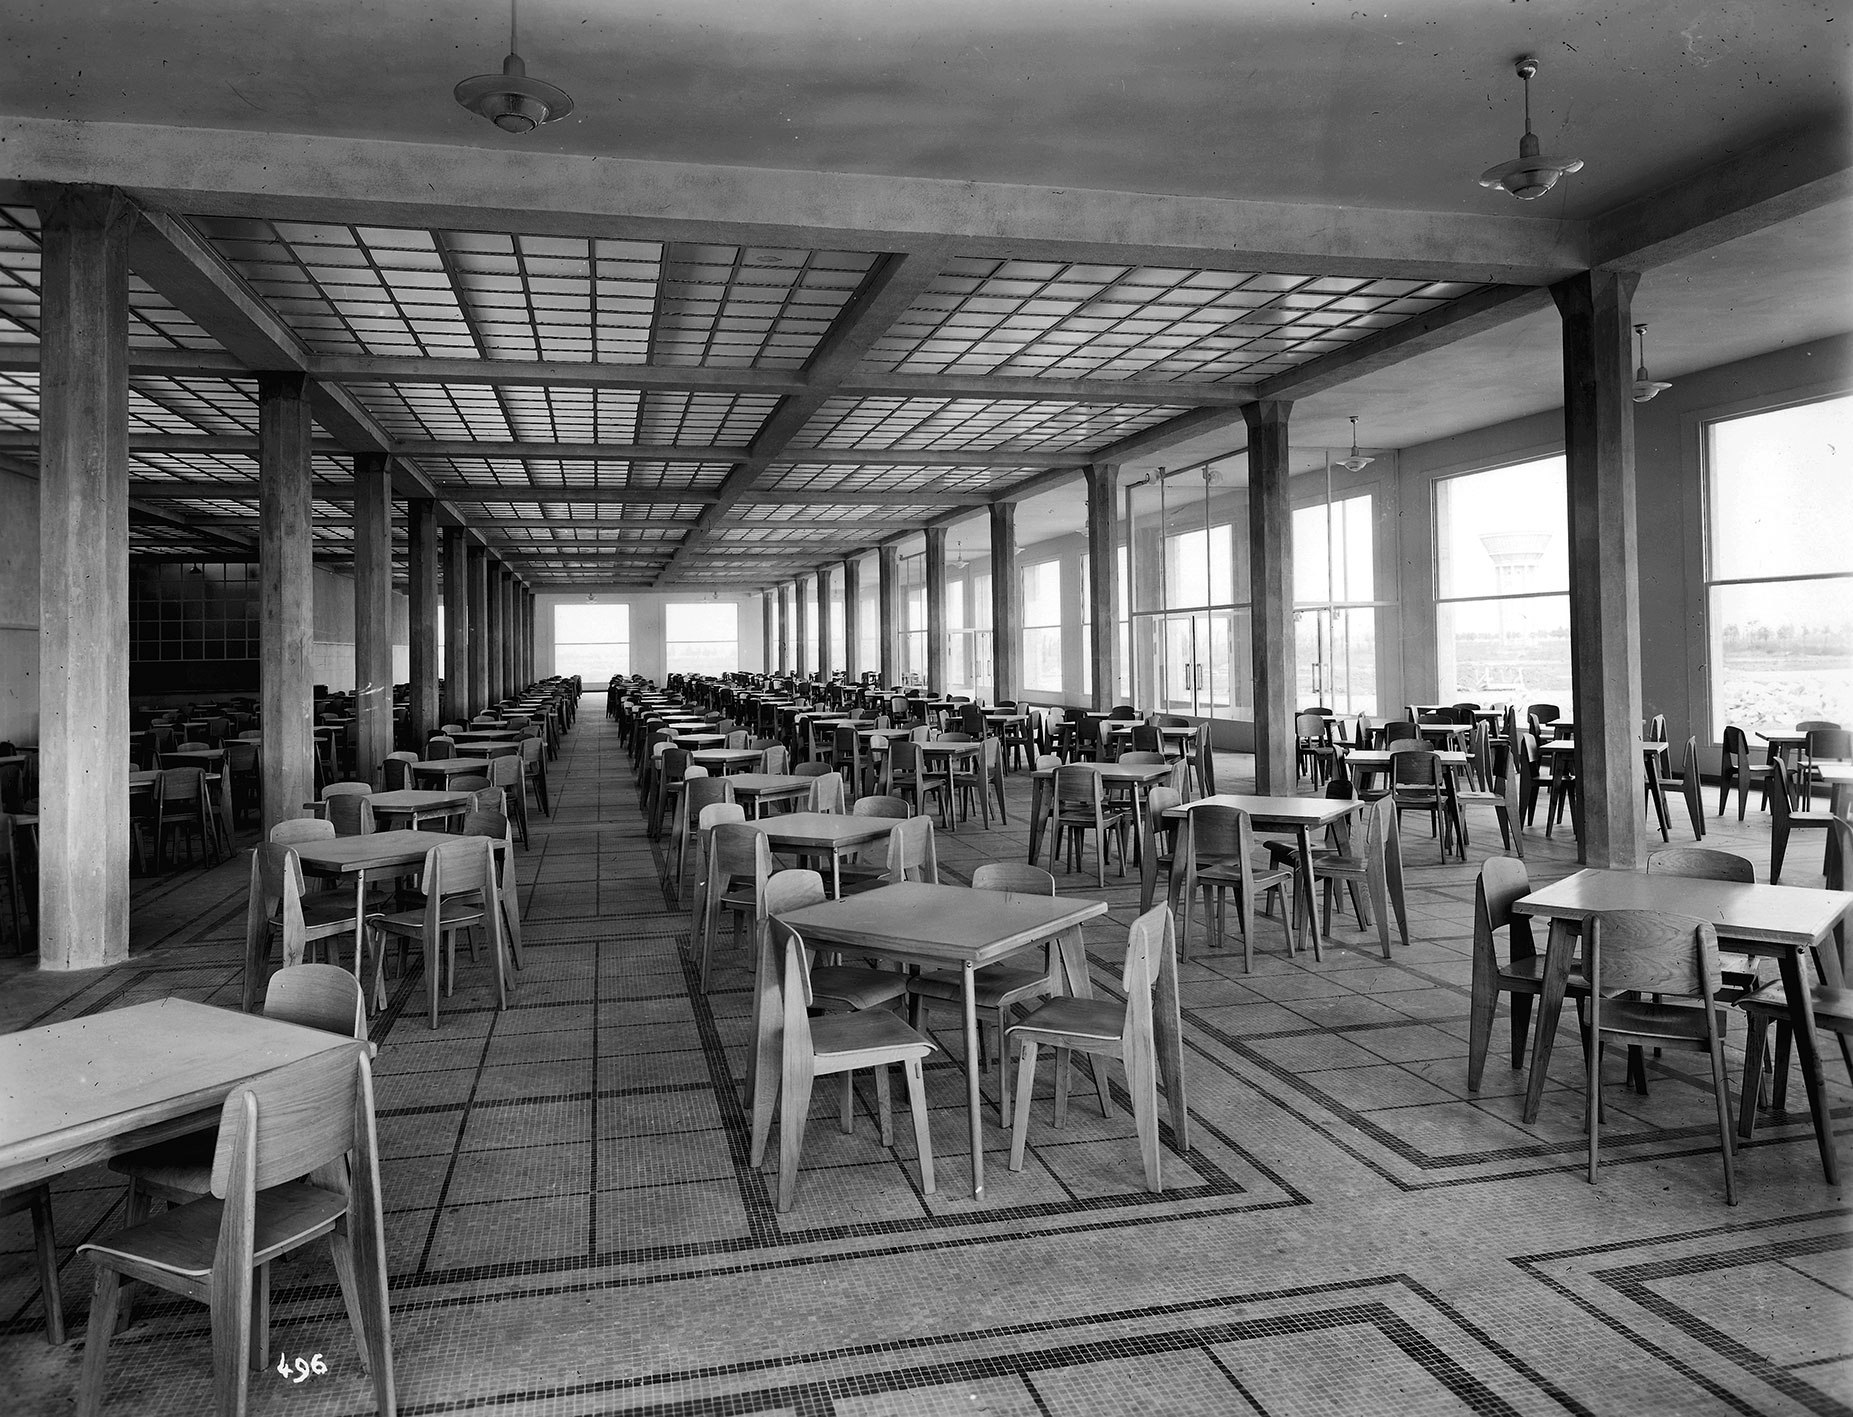 Headquarters of the Centre d’Études Nucléaires du Commissariat à l’Énergie Atomique, Saclay (architects A. and G. Perret, 1948–1953). Refectory fitted out with the Tout Bois chairs.